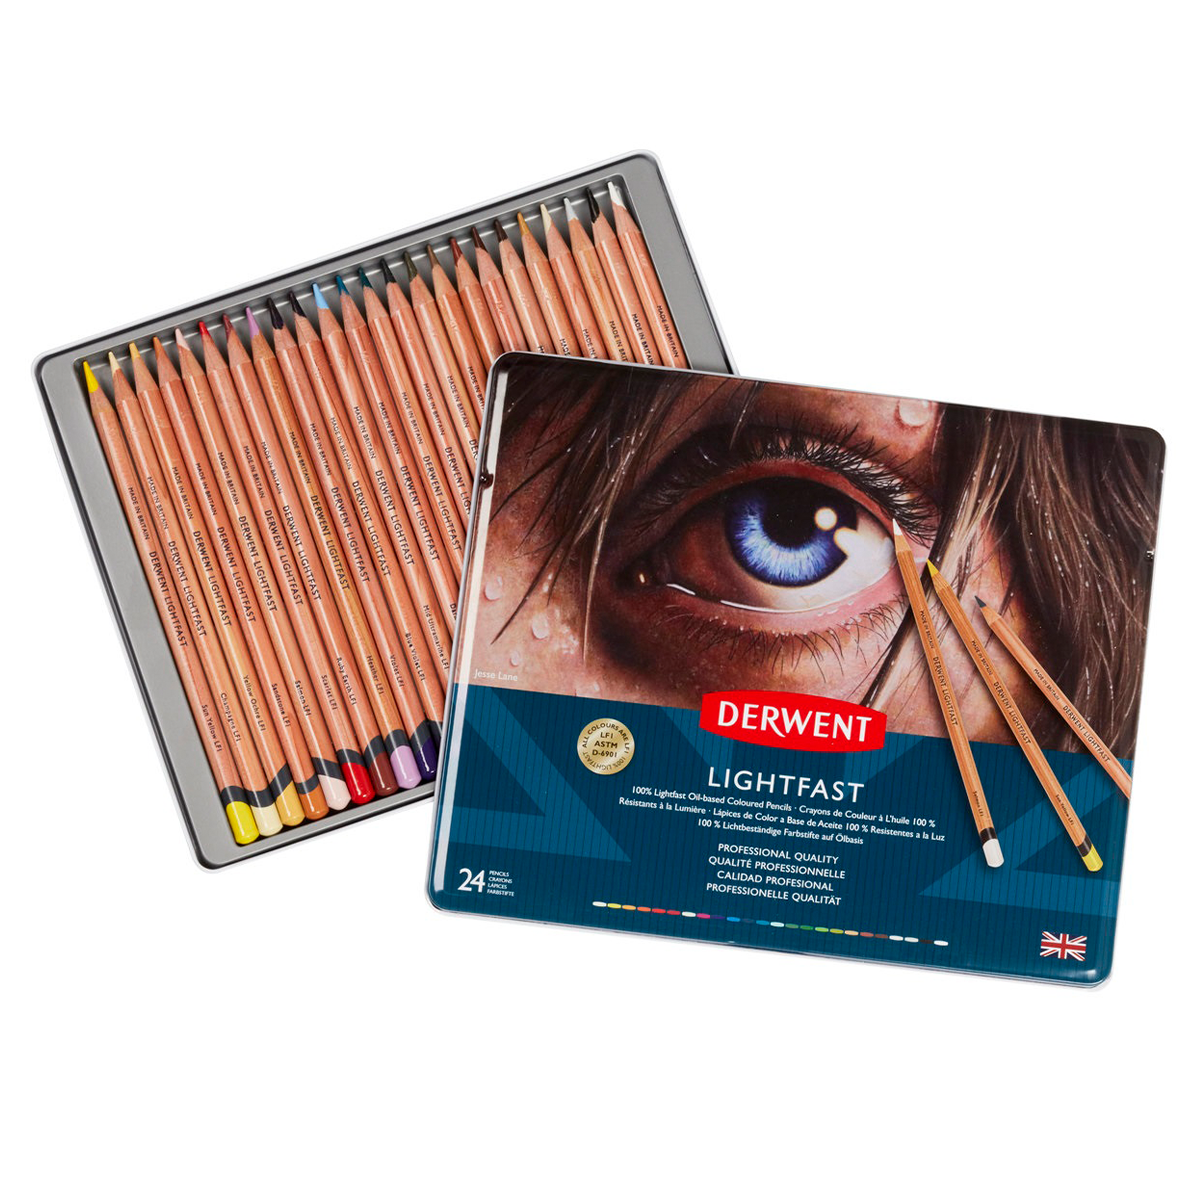 Derwent Lightfast Colored Pencils 24 Tin, Set of 24, 4mm Wide Core, 100%  Lightfast, Oil-based, Premium Core, Creamy, Ideal for Drawing, Coloring